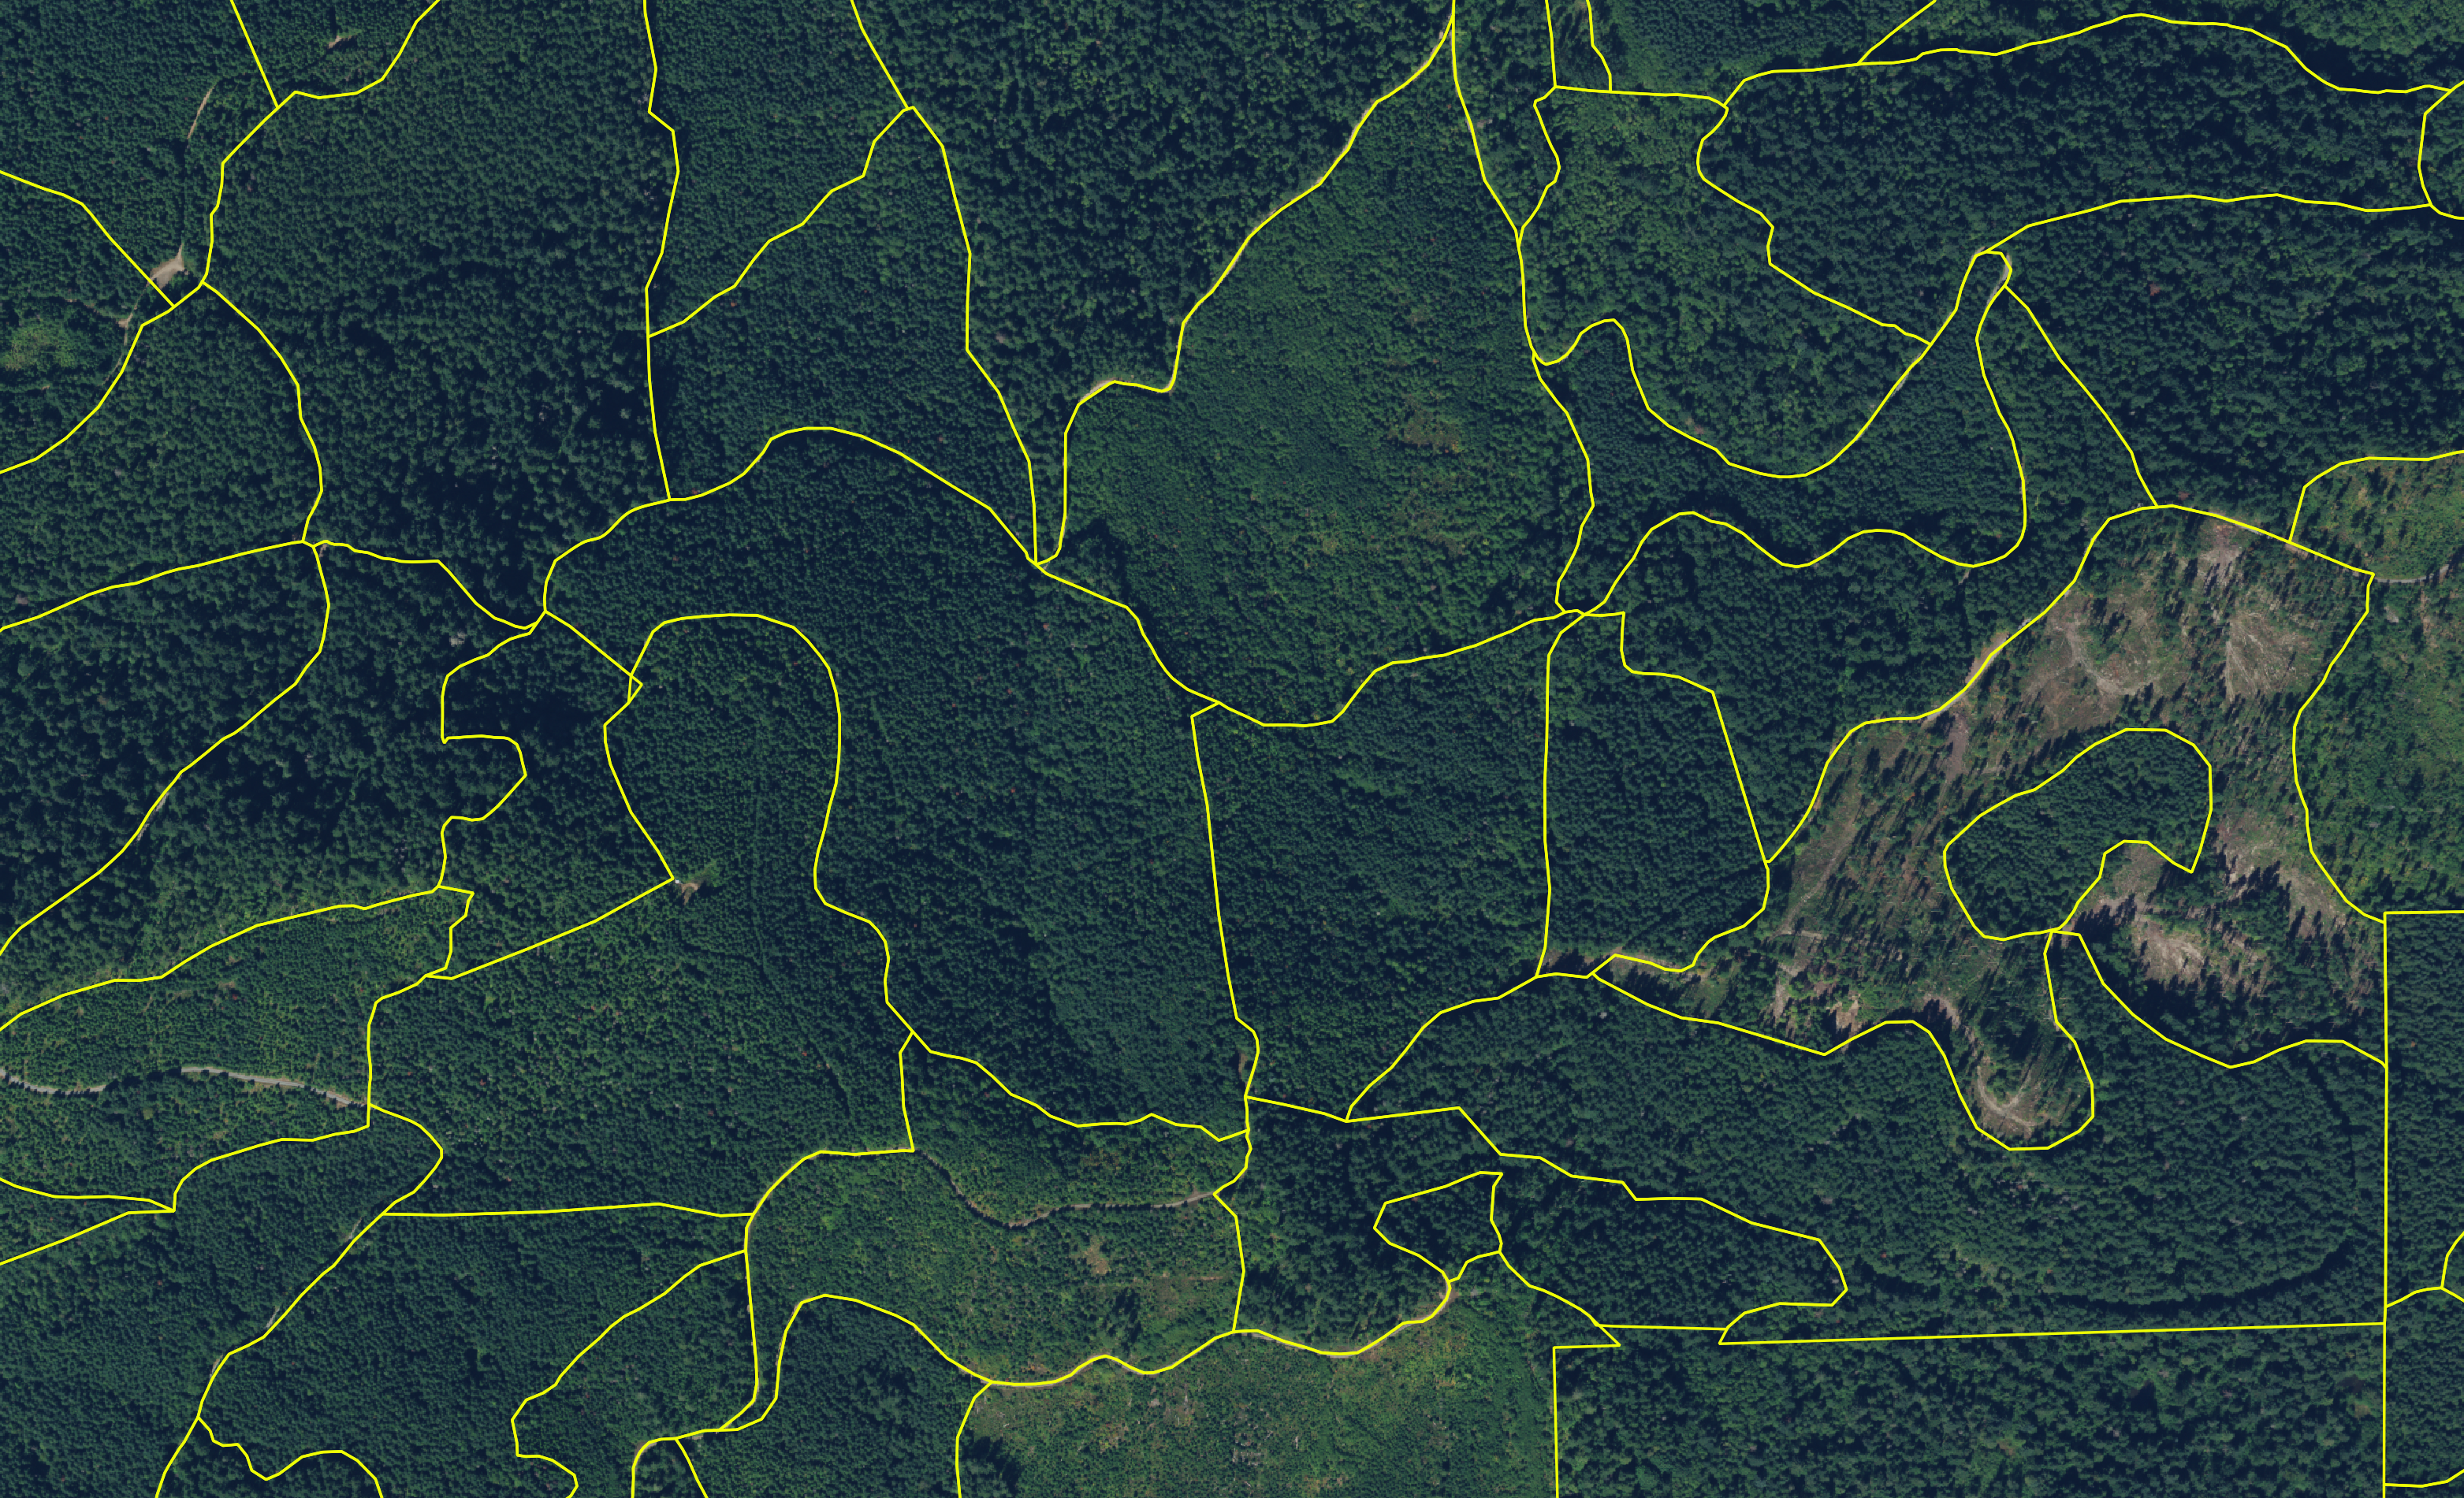 Forest stand boundaries overlaid on an aerial image.